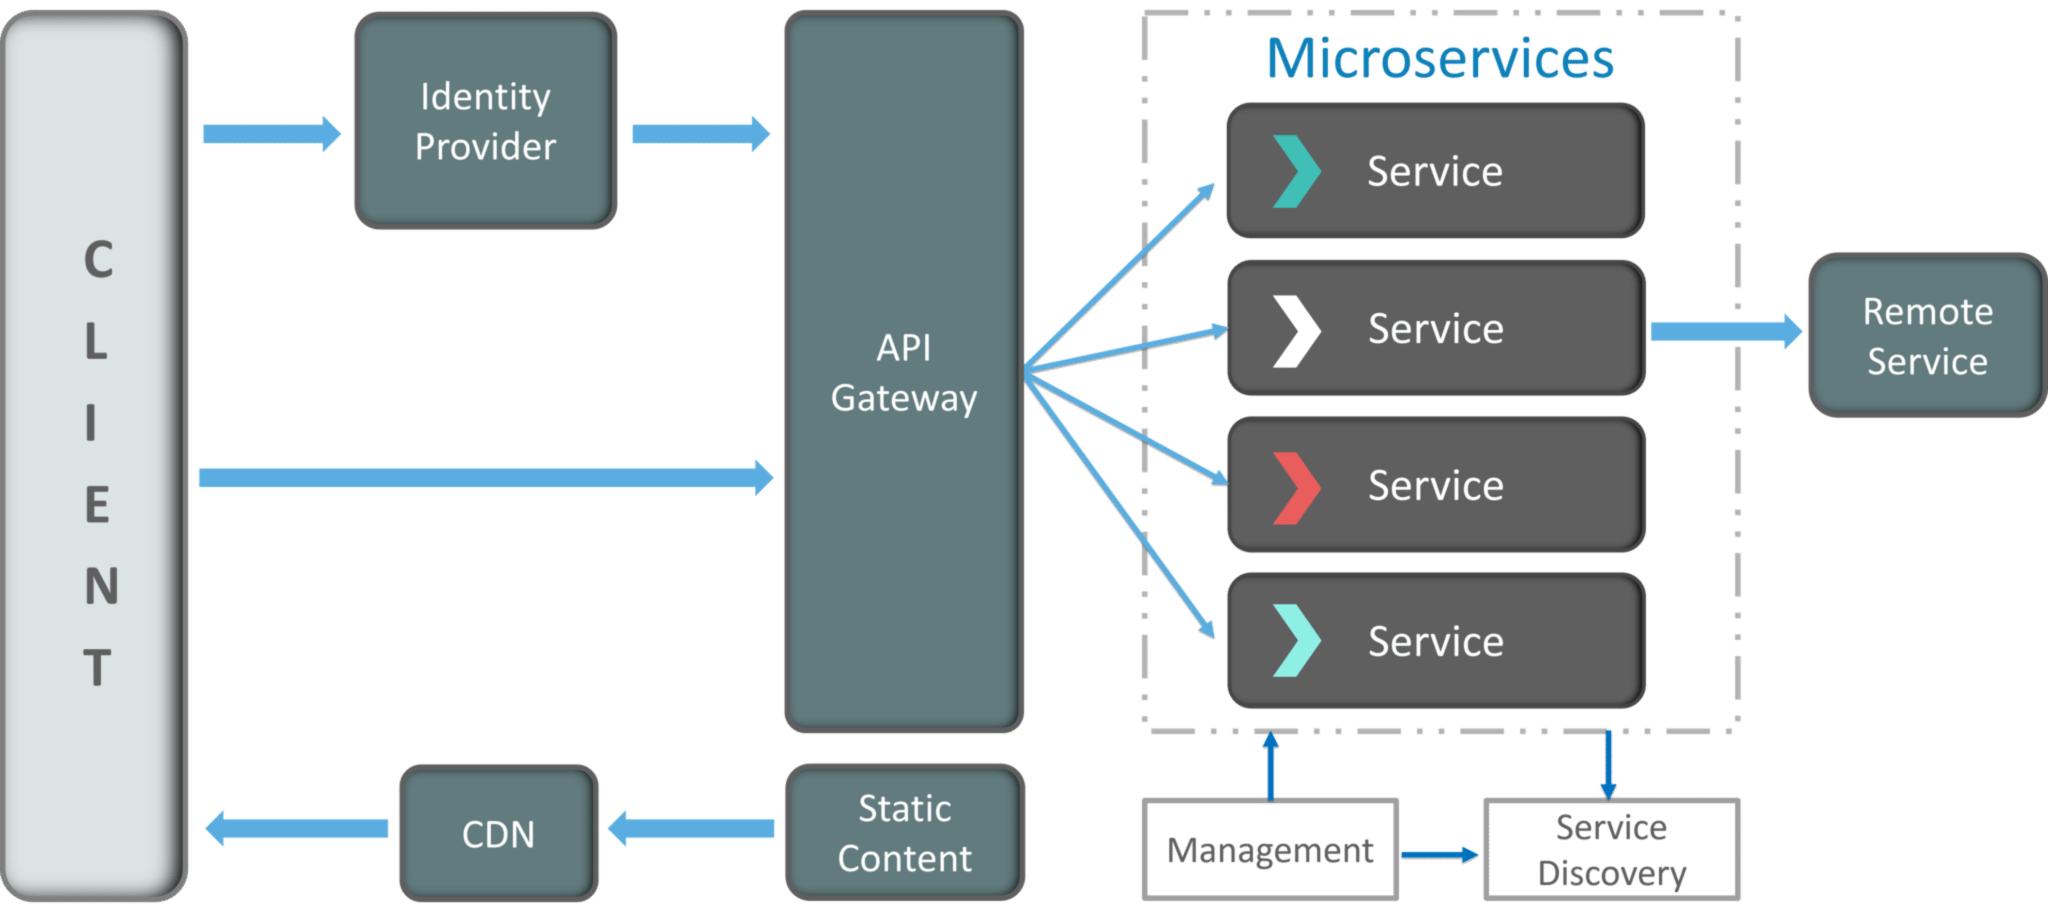 Top Microservices Interview Questions and Answers